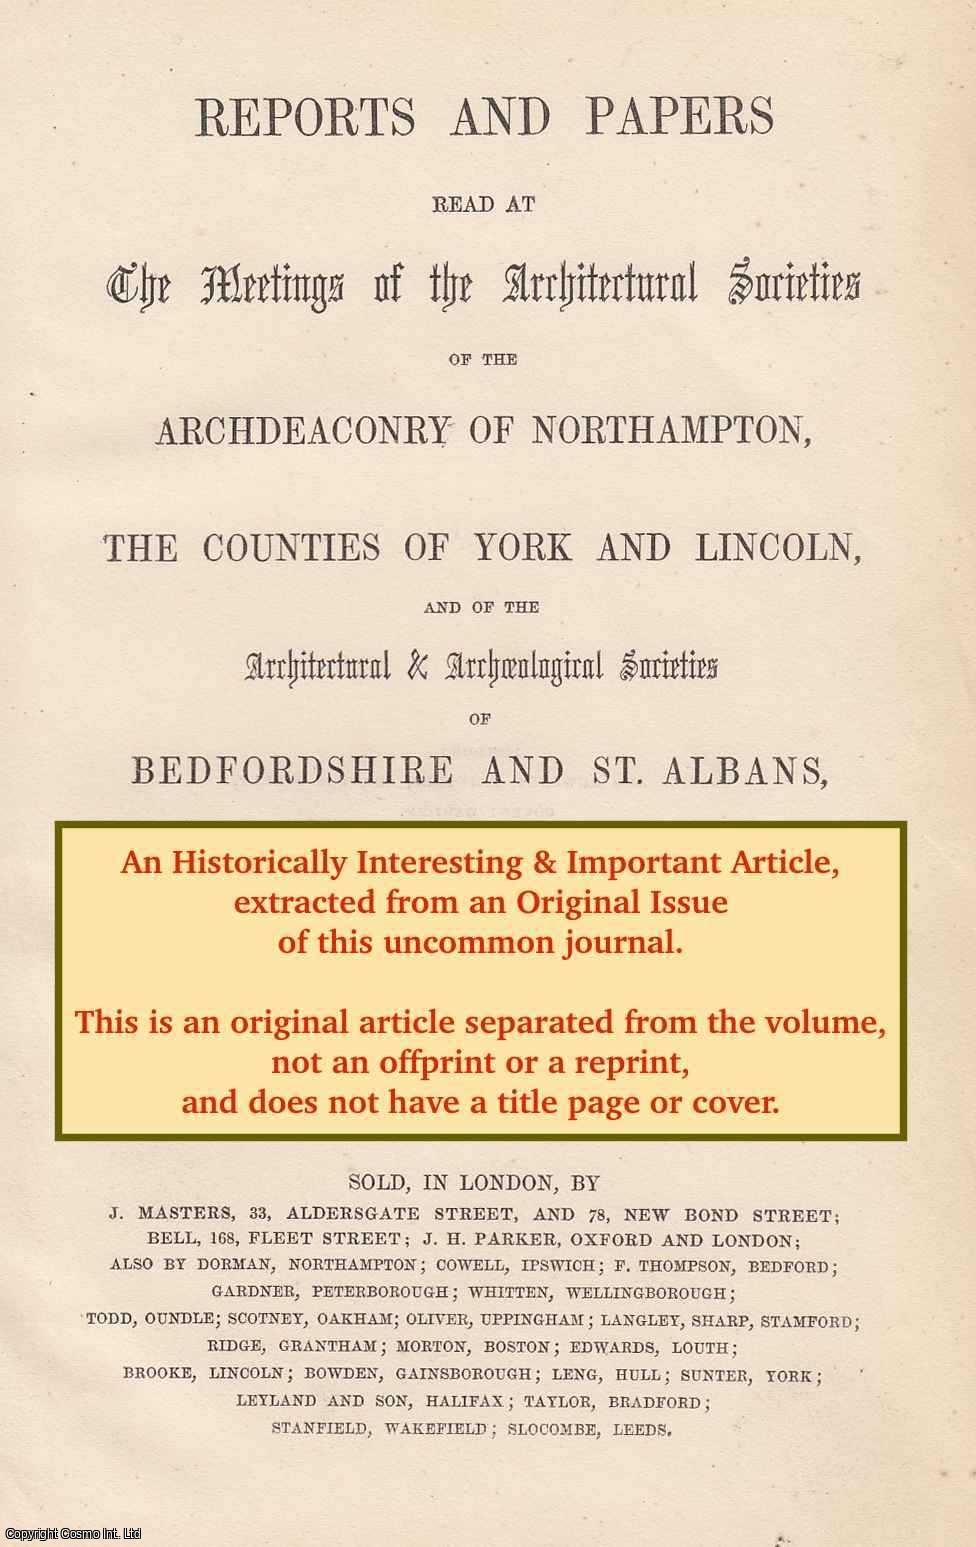 --- - The Canonization of St. Hugh of Lincoln. An original article from Associated Architectural Societies, Reports and Papers, 1956.